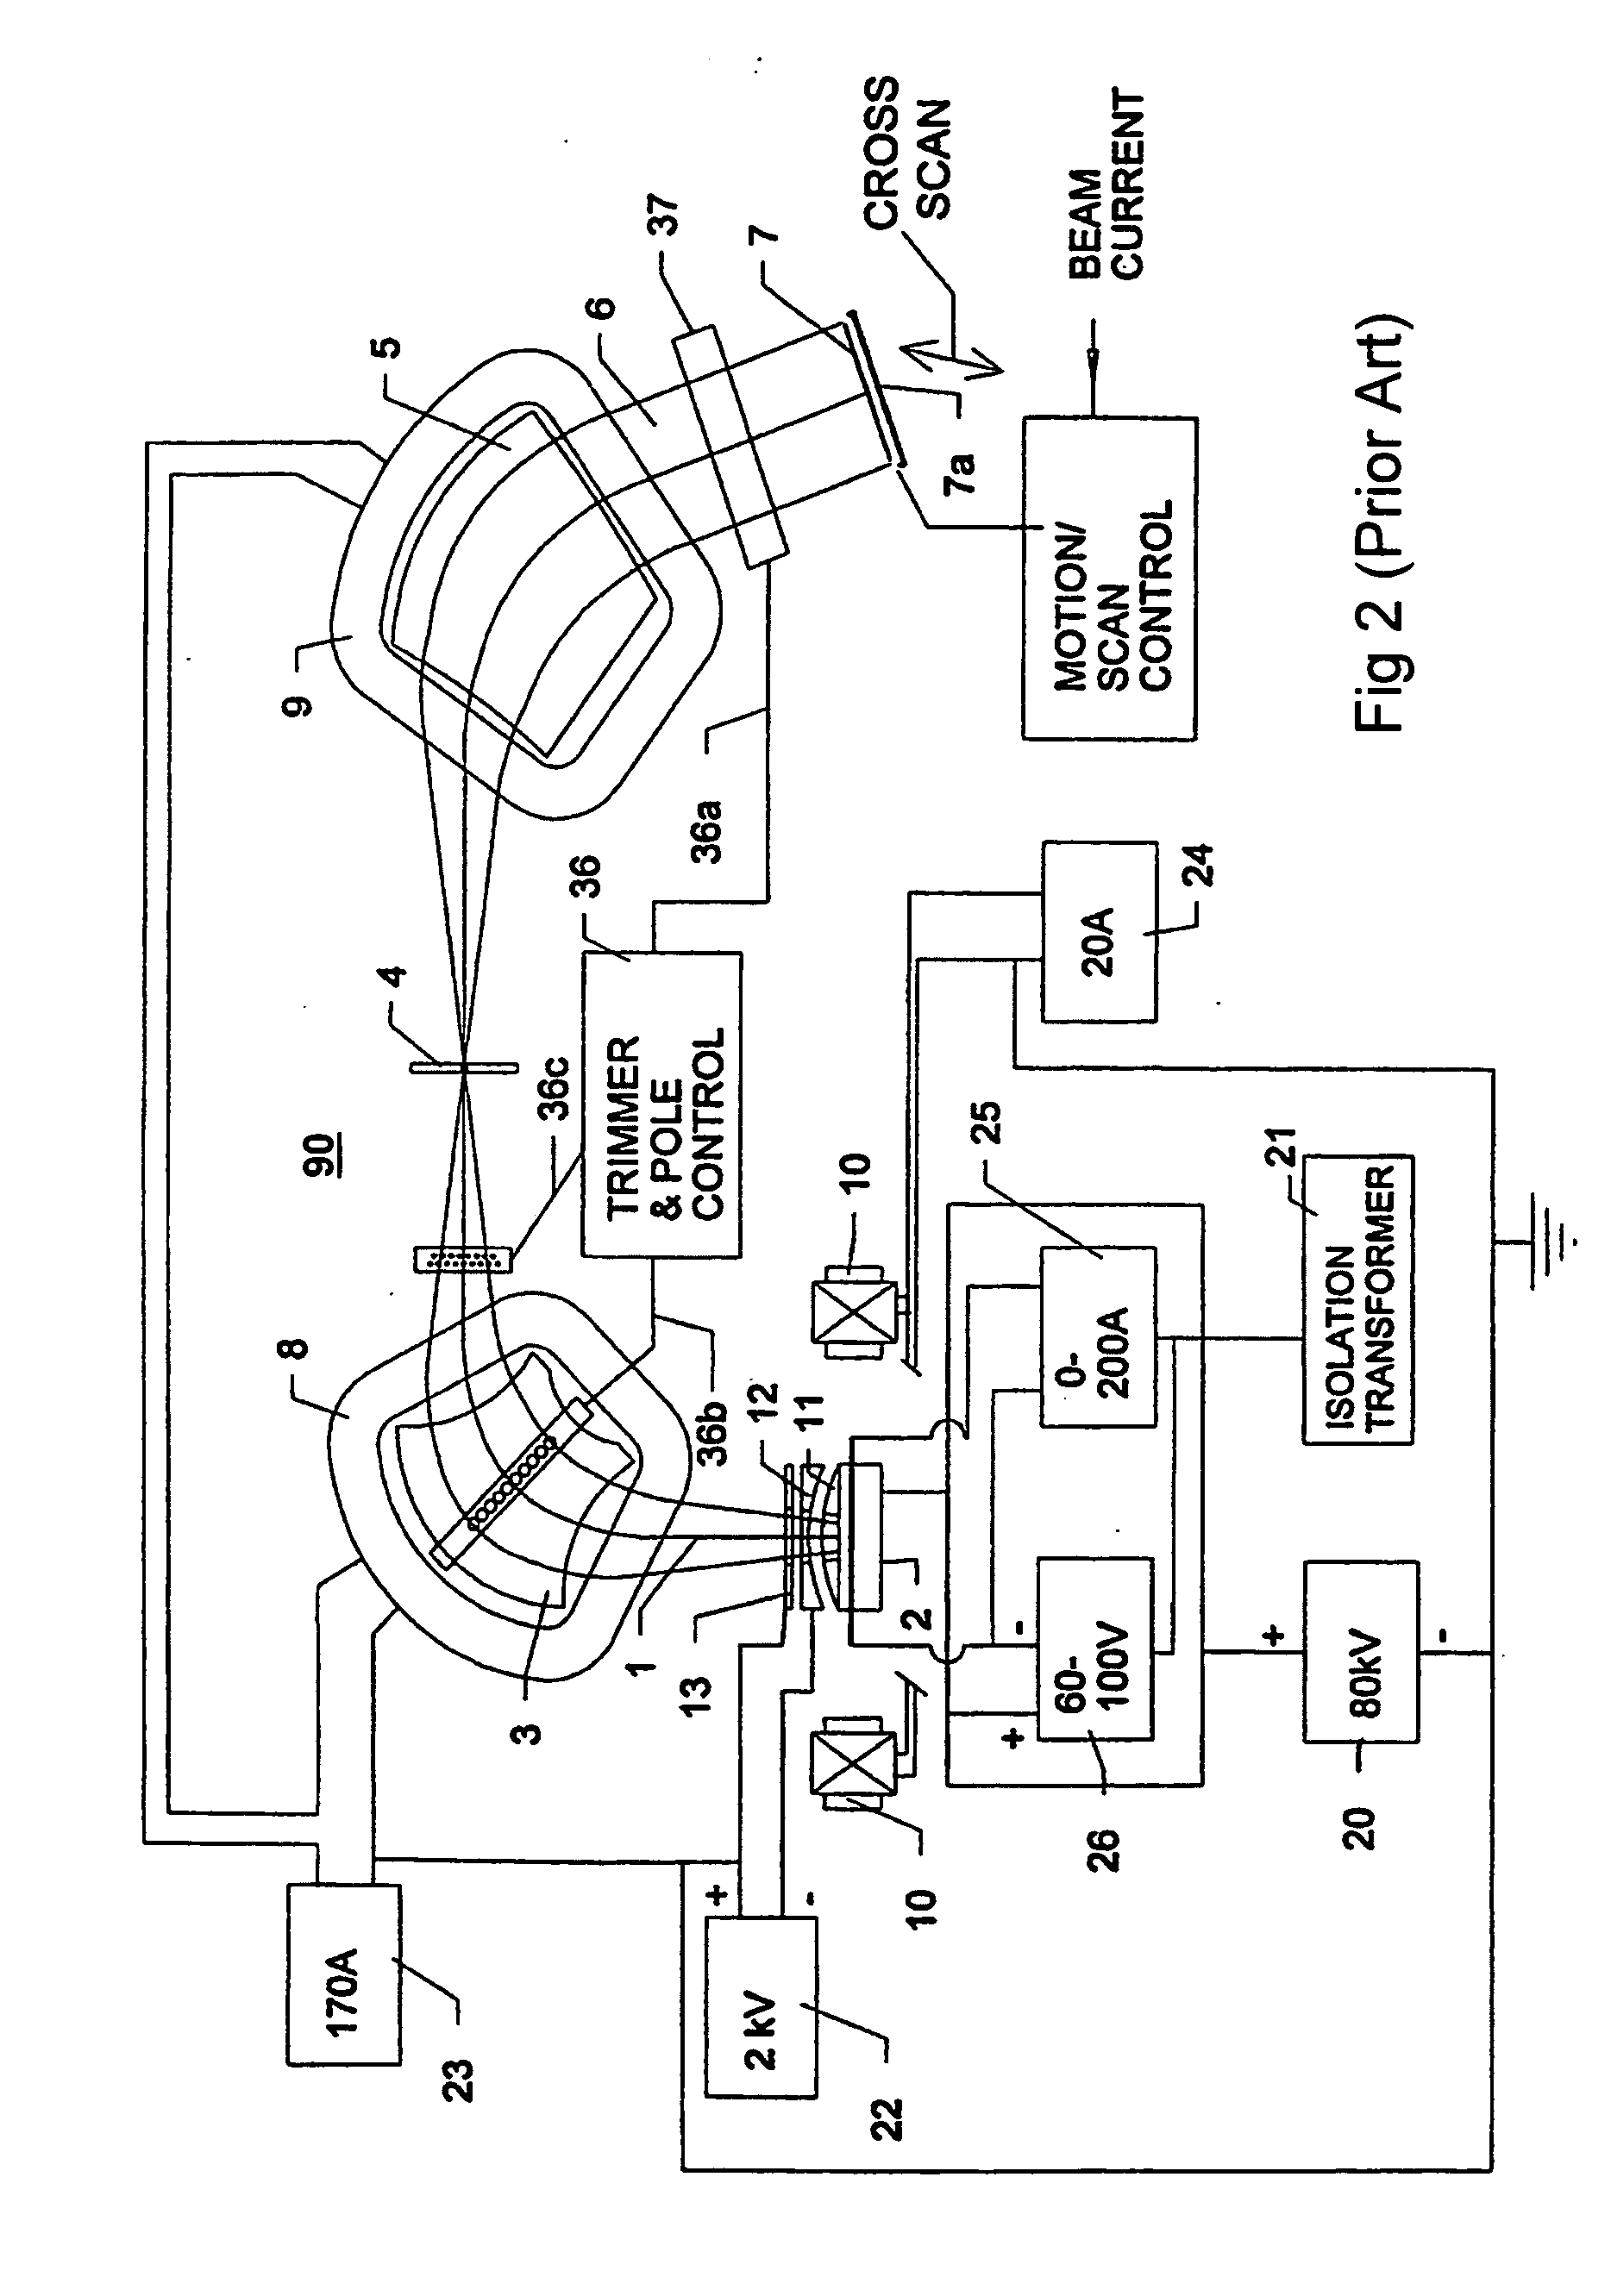 Apparatus and methods for ion beam implantation